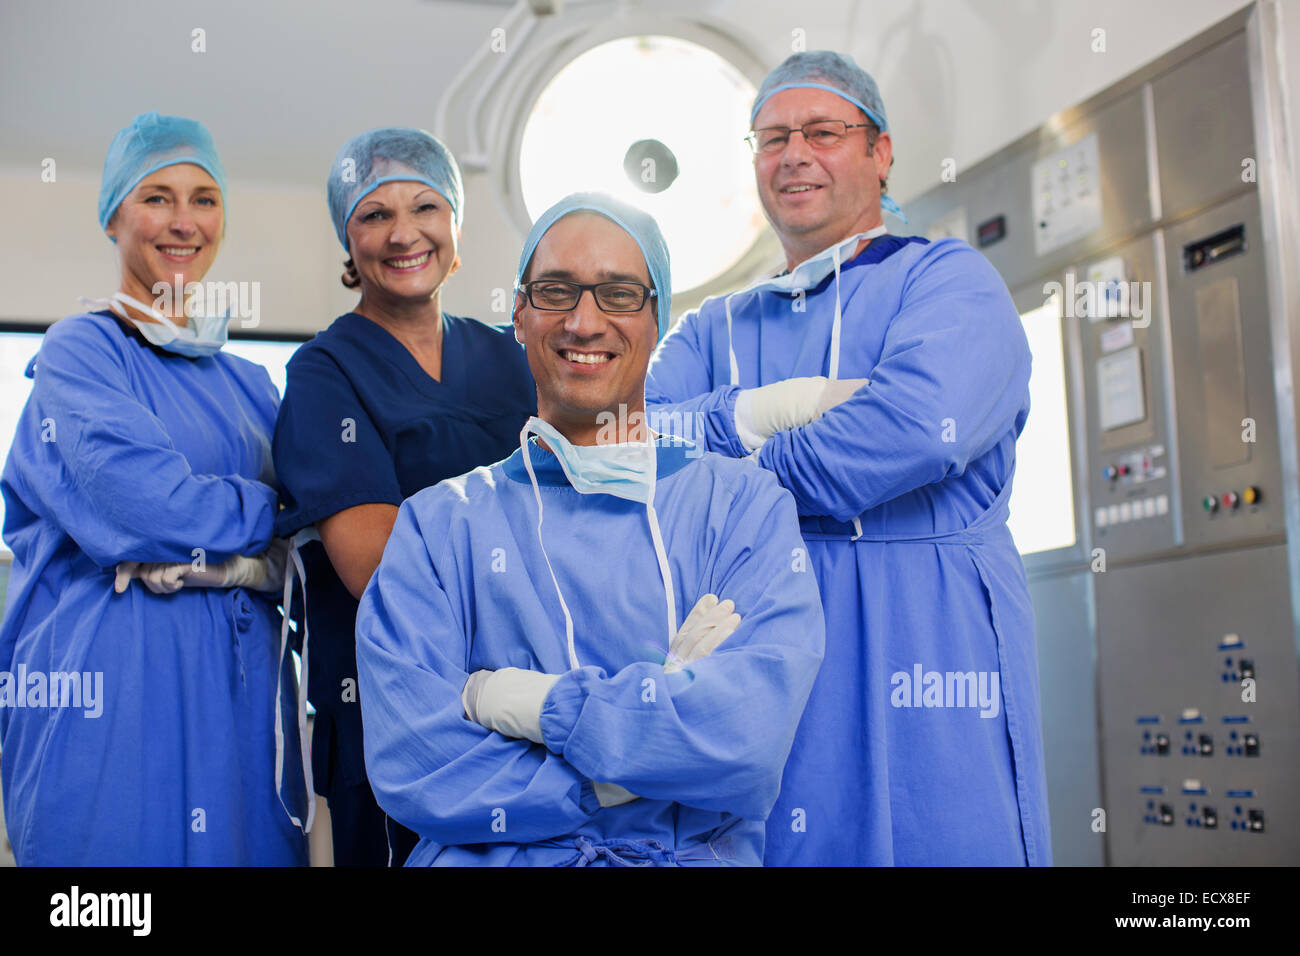 Team of doctors wearing surgical clothing in operating theater Stock Photo